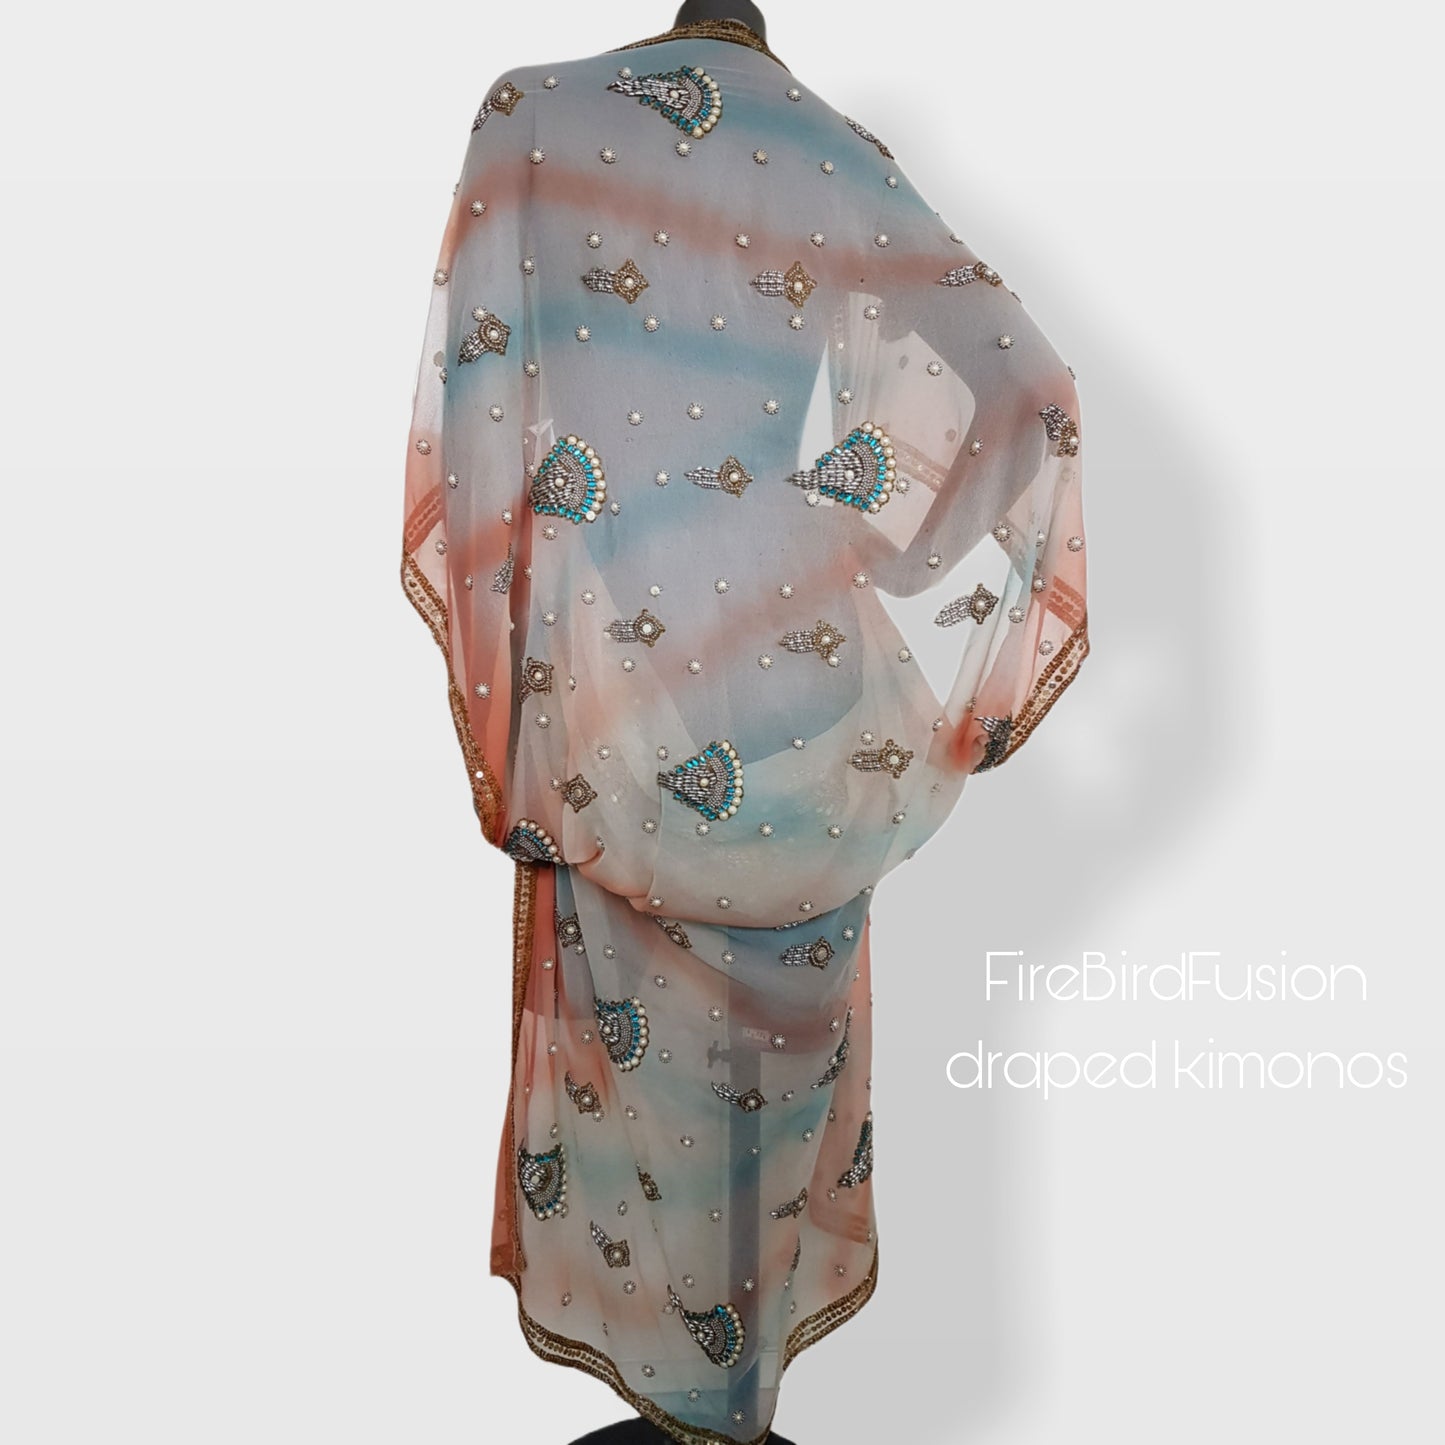 Luxurious semi sheer draped kimono in white, blue and pink with pearl embroidery (M)